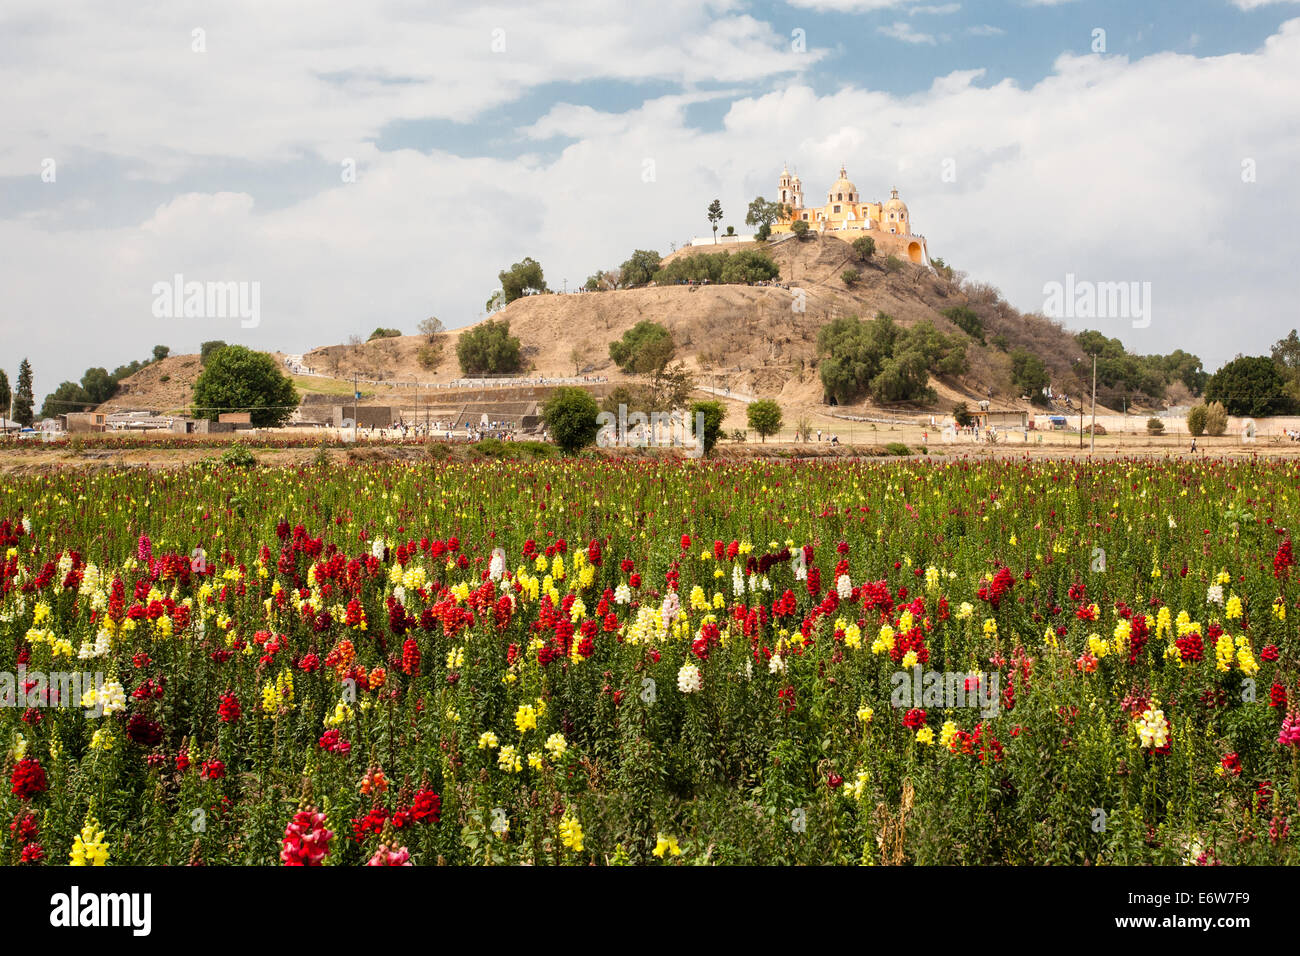 Field of flowers near the pyramid and the Remedios Temple in Cholula, Puebla, Mexico. Stock Photo